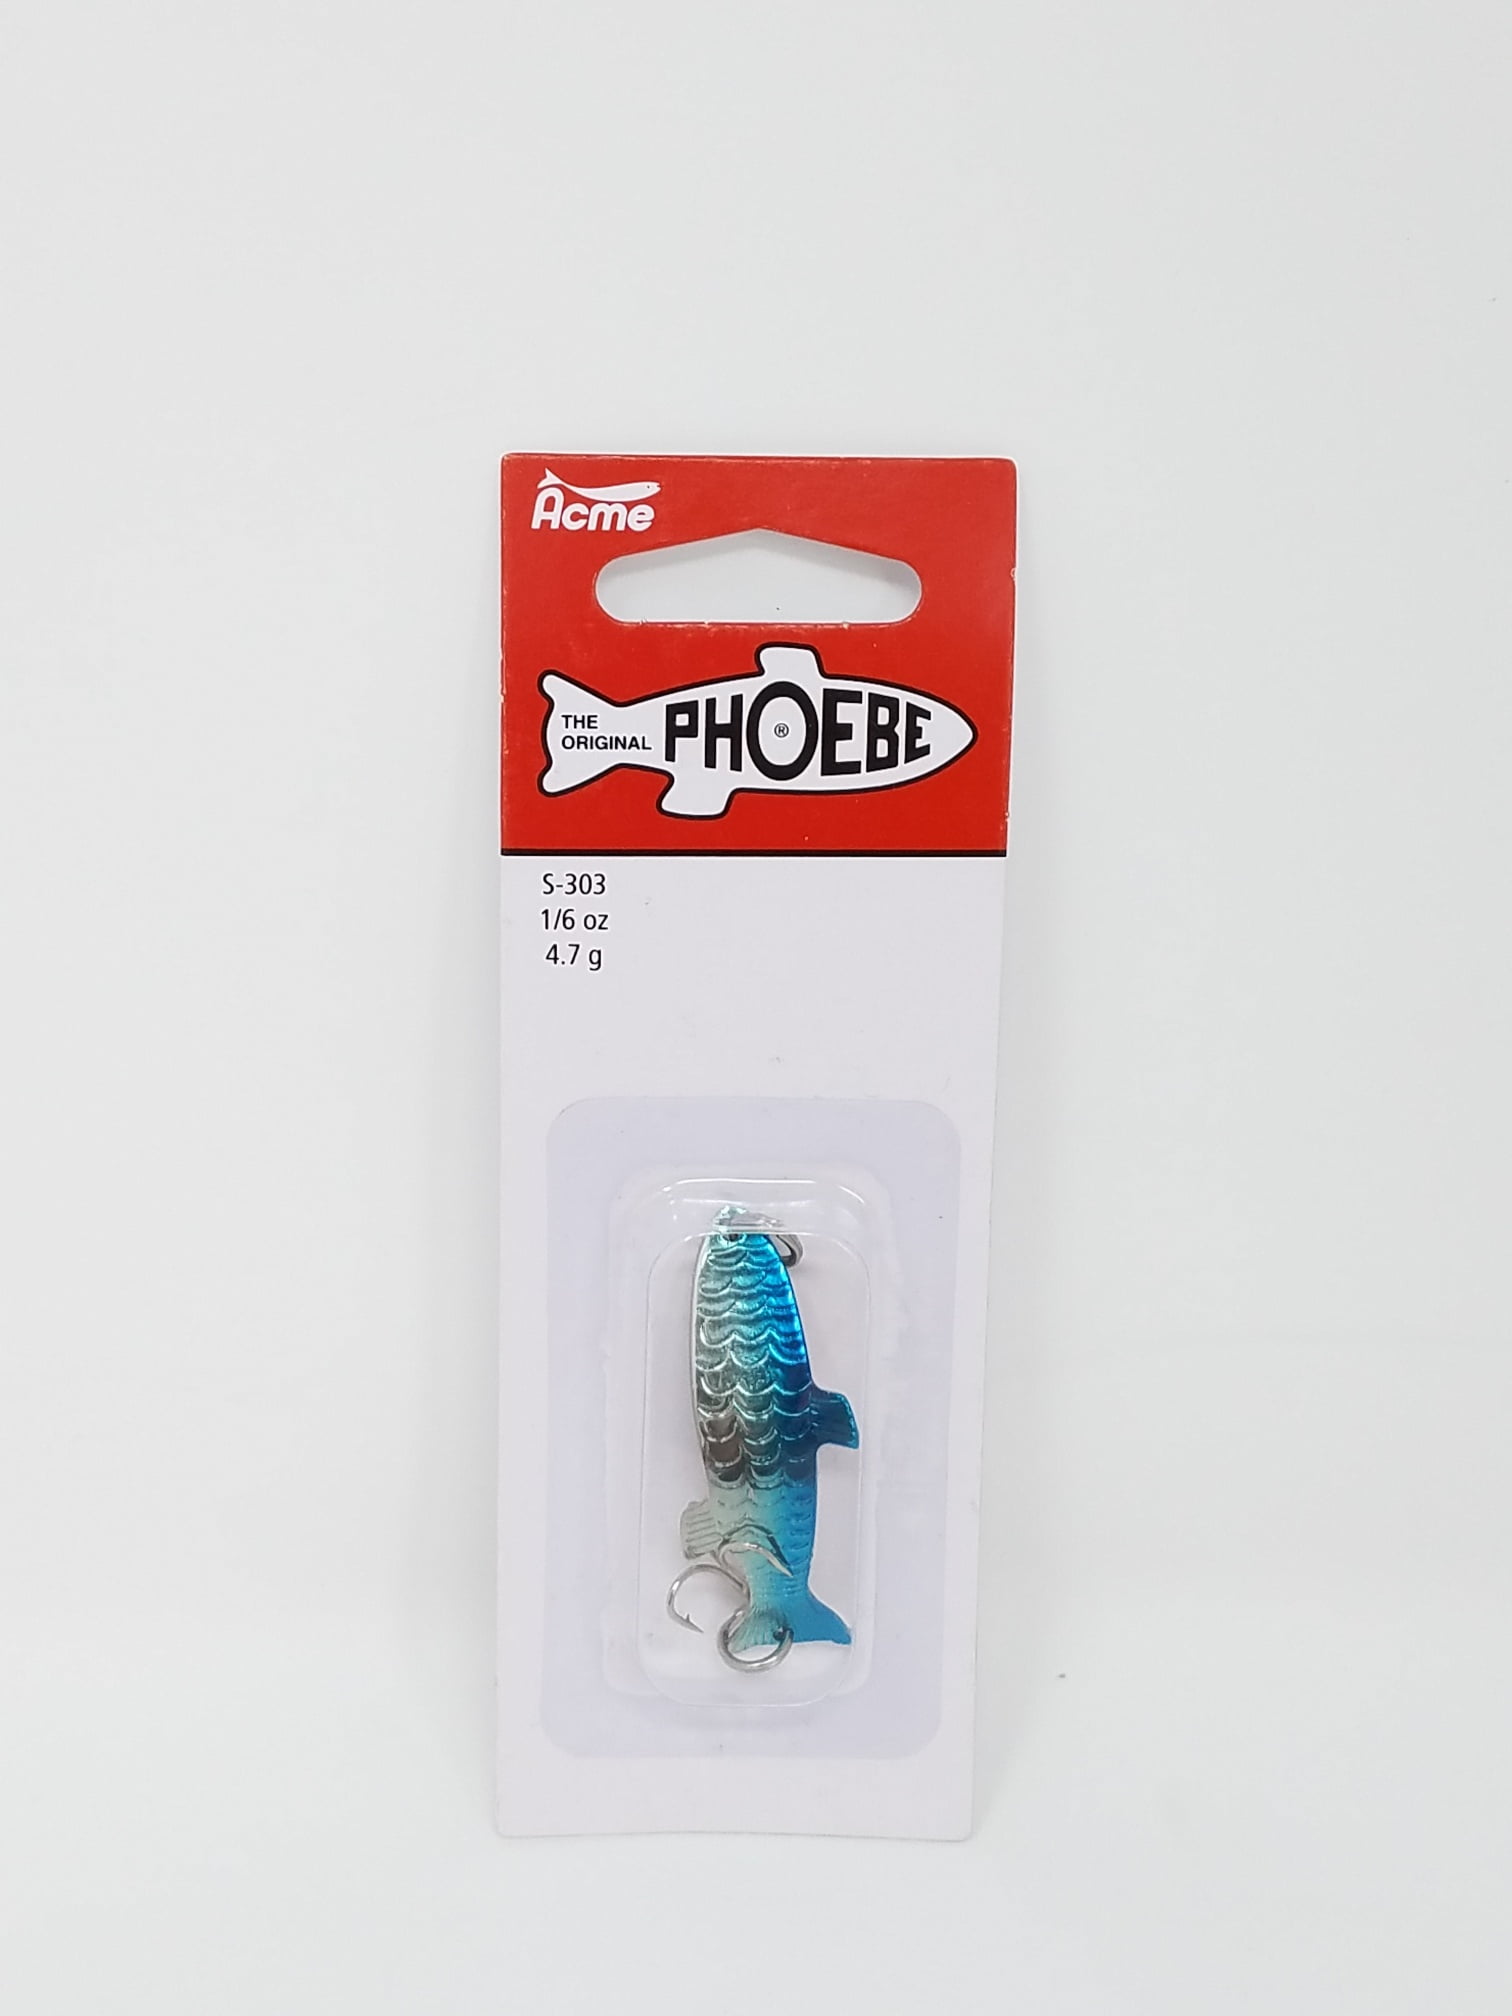  Acme Phoebe 6 Pack Kit. Includes 3 Colors and 2 Sizes. 6 Total  Acme Phoebe top Performing Fishing Lures. : Sports & Outdoors